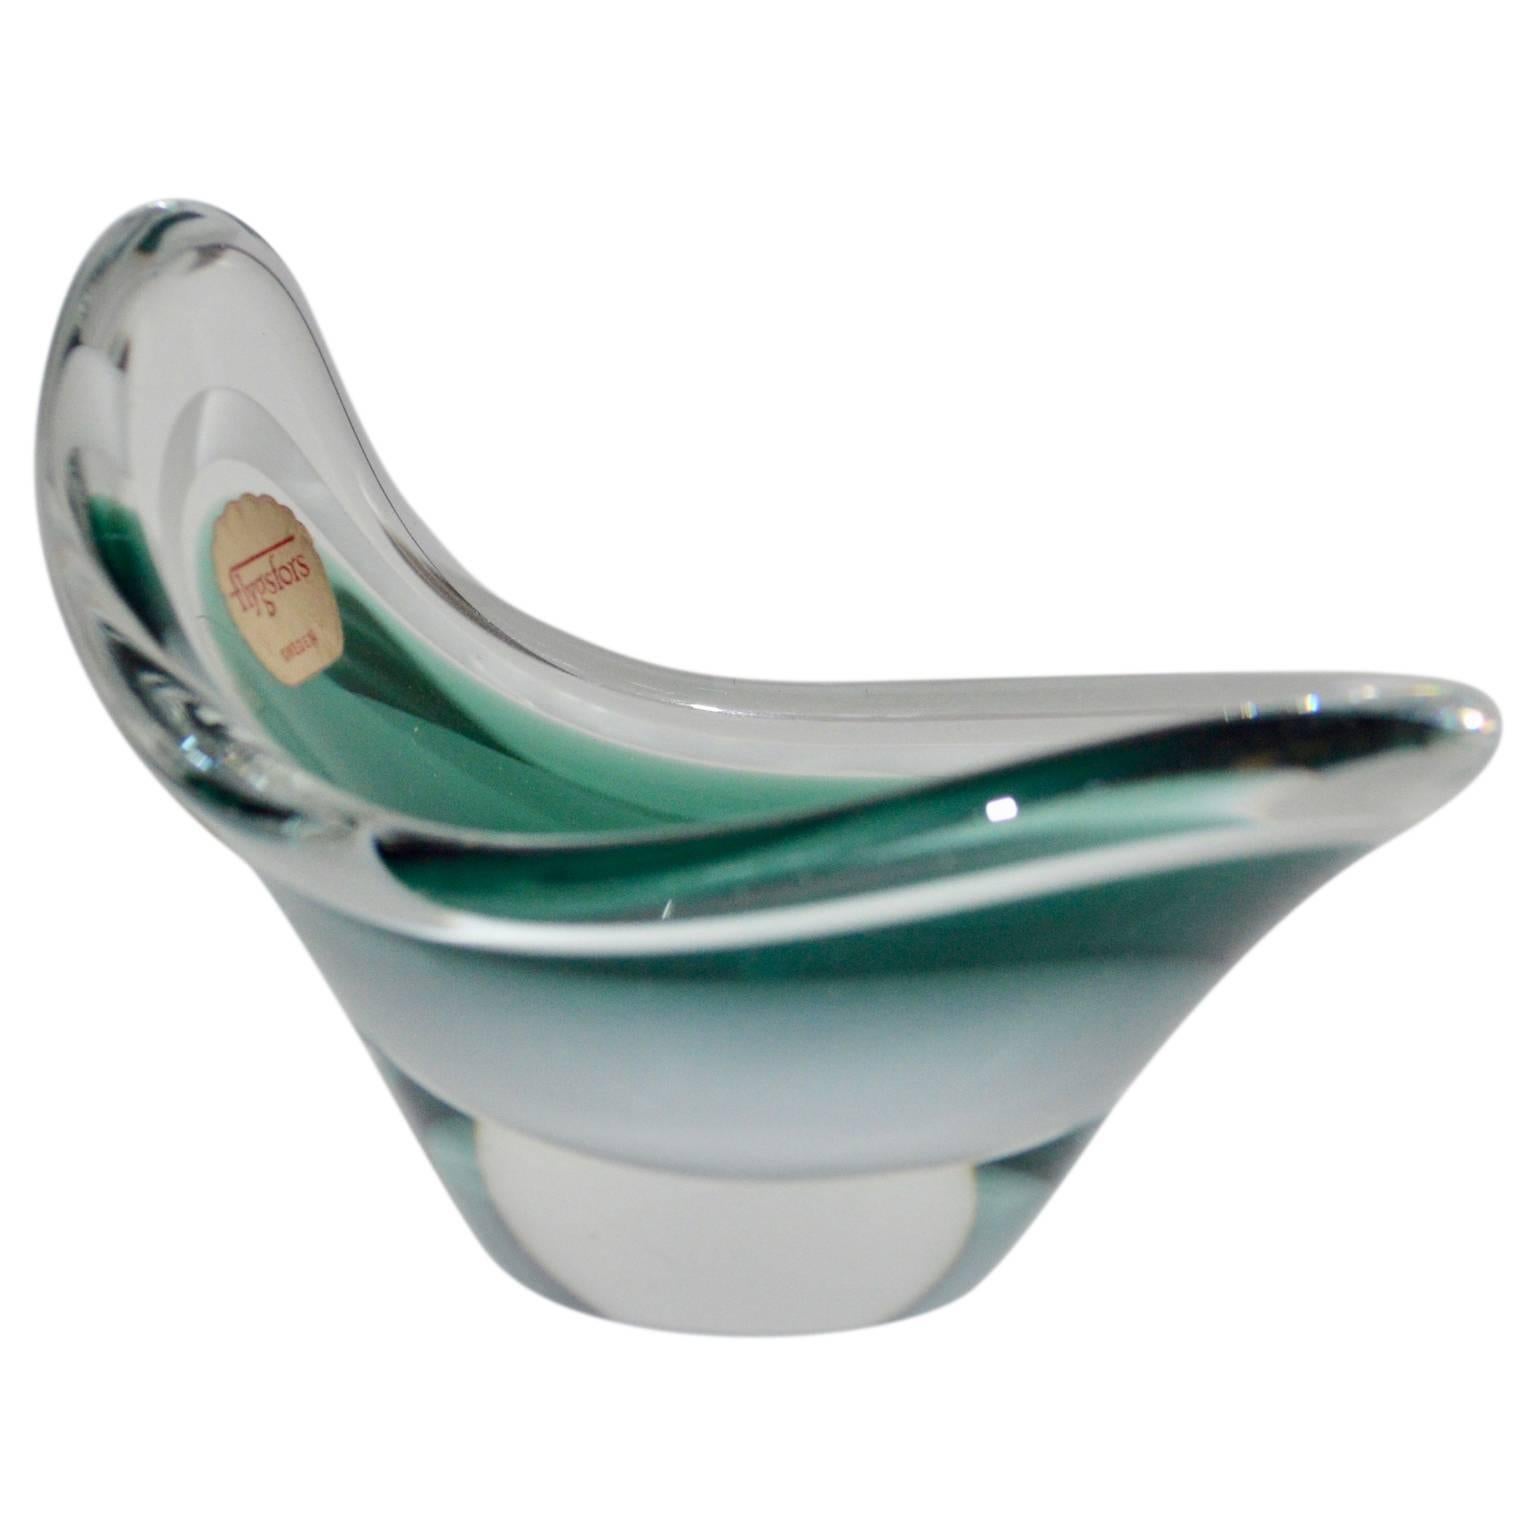 Mid-Century Modern Midcentury Small Green Flygfors Trincket or Ashtray For Sale